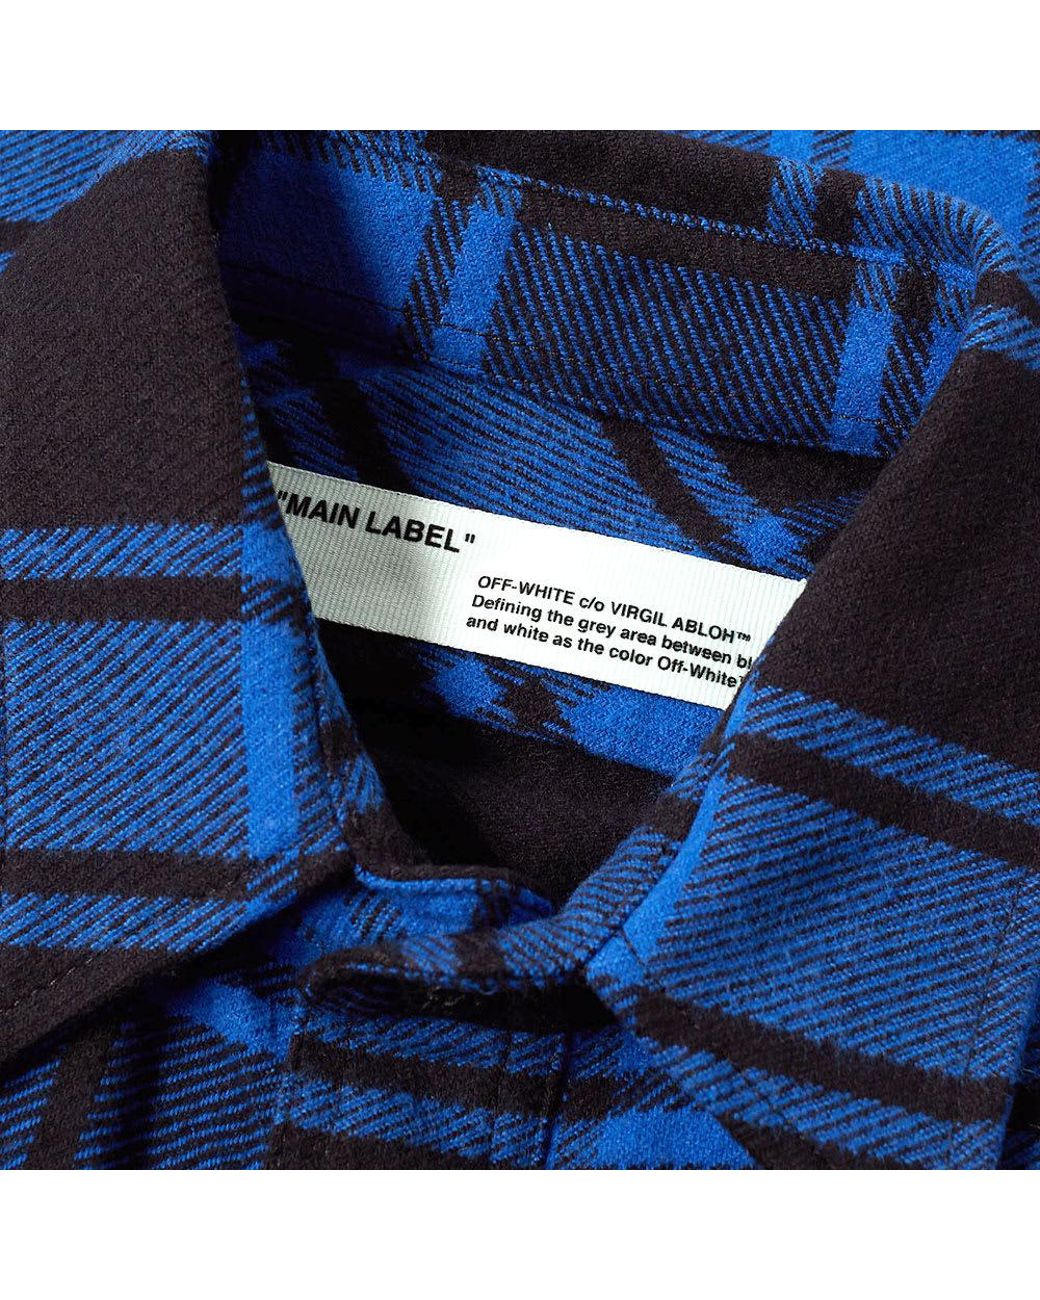 Off-White c/o Virgil Abloh Quote Flannel Shirt in Blue for Men 